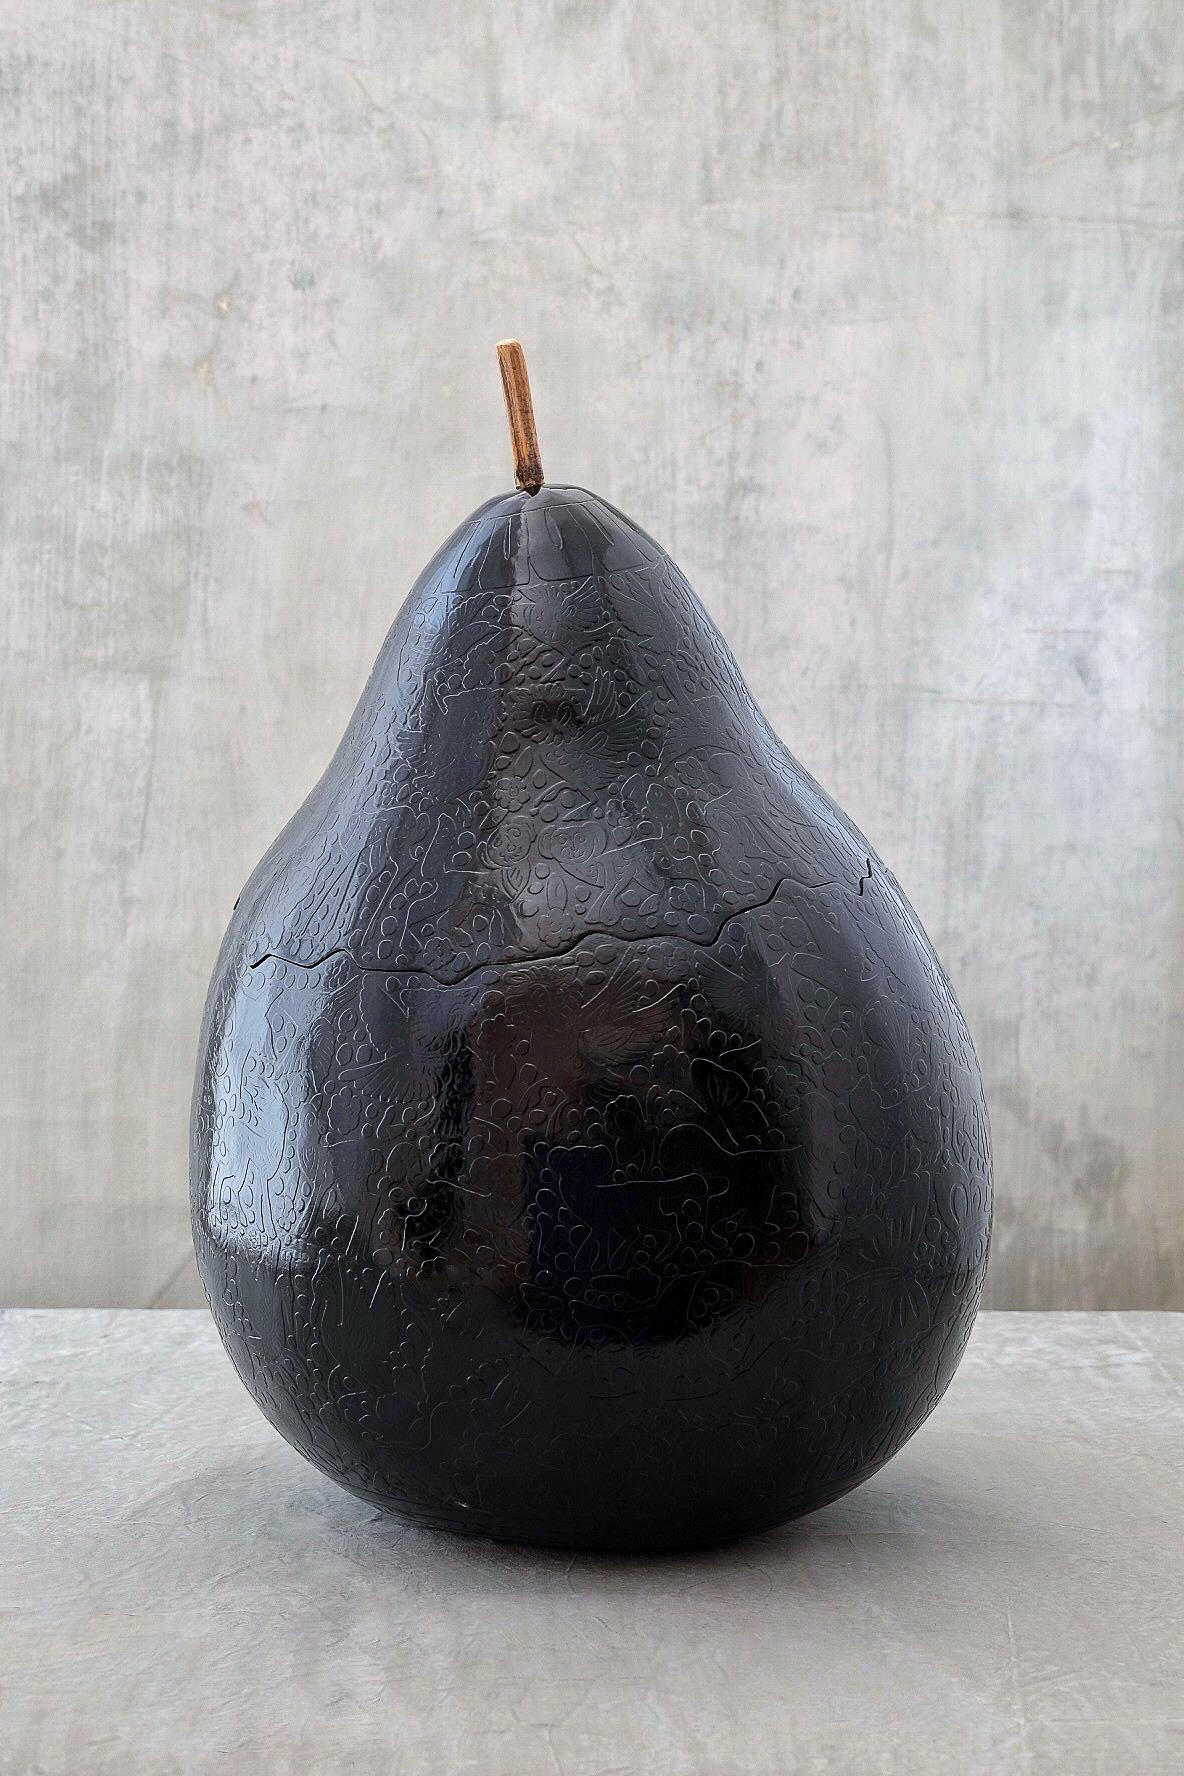 Guaje oli gourd by Onora
Dimensions: 37 x 25 cm
Materials: gourd, natural pigments mixed with chia oil and then hand burnished with river stones
Guaje is a fruit, each piece has a different size. 

Hand lacquered gourds have a long and rich